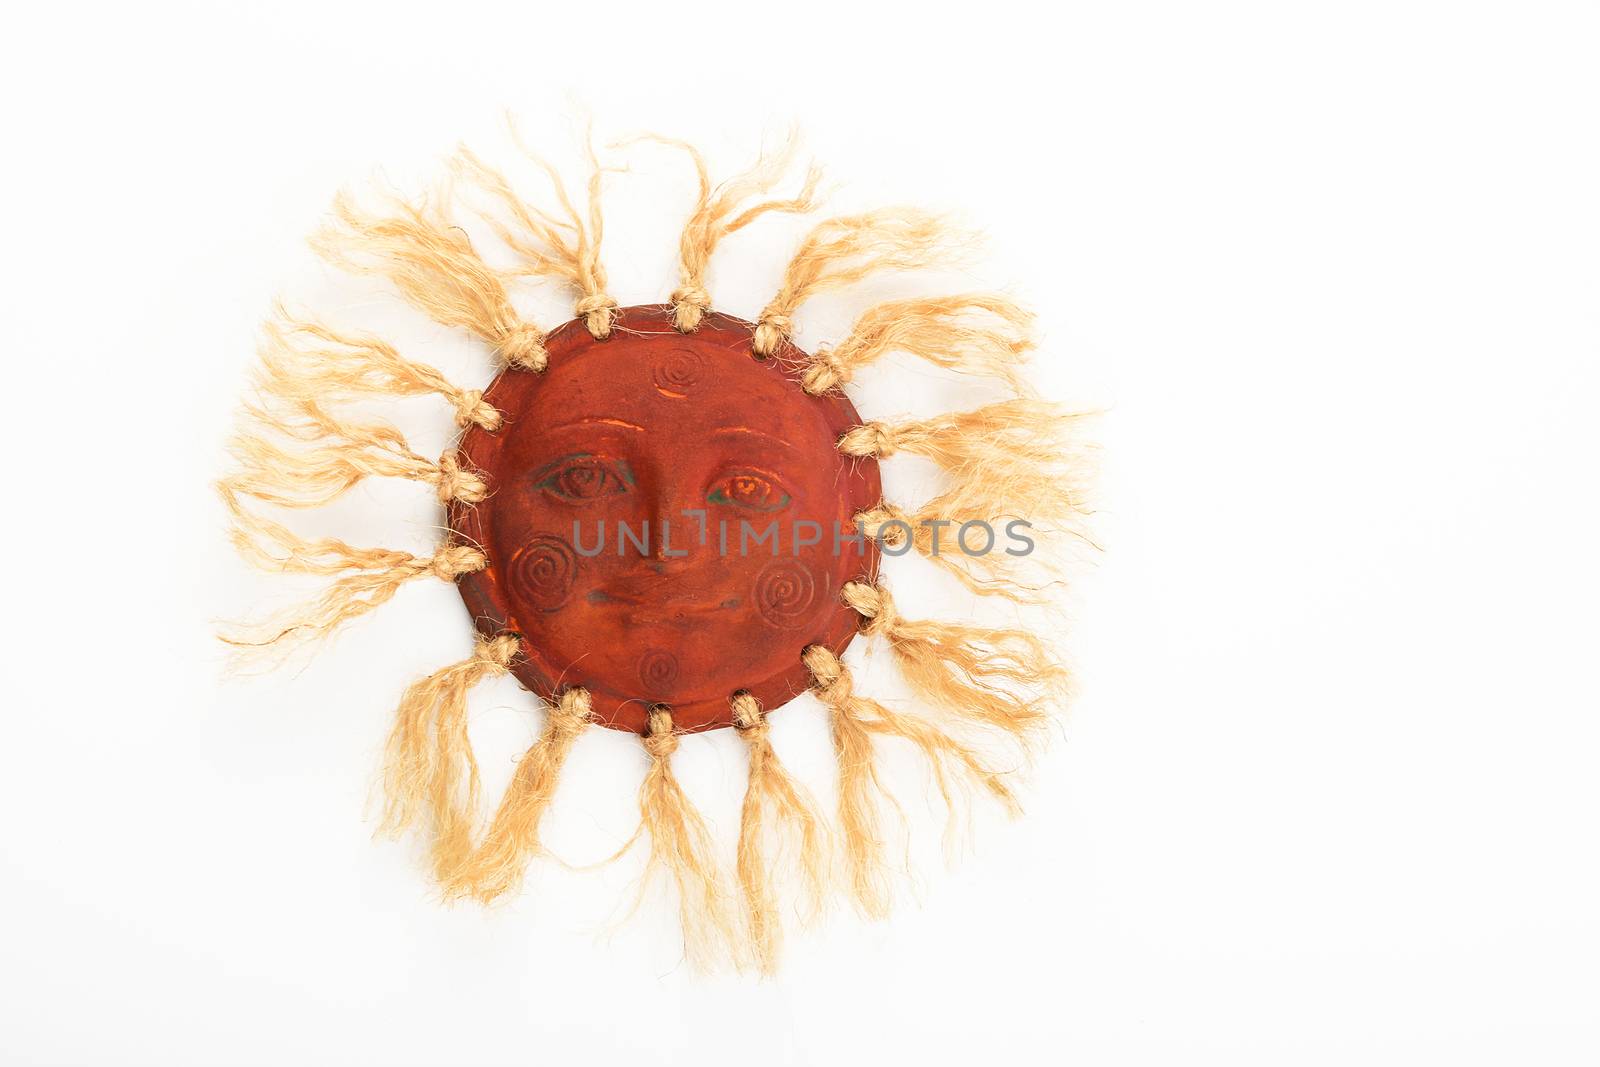 Mexican traditional ceramic happy sun face symbol plate with rays of jute rope isolated on white